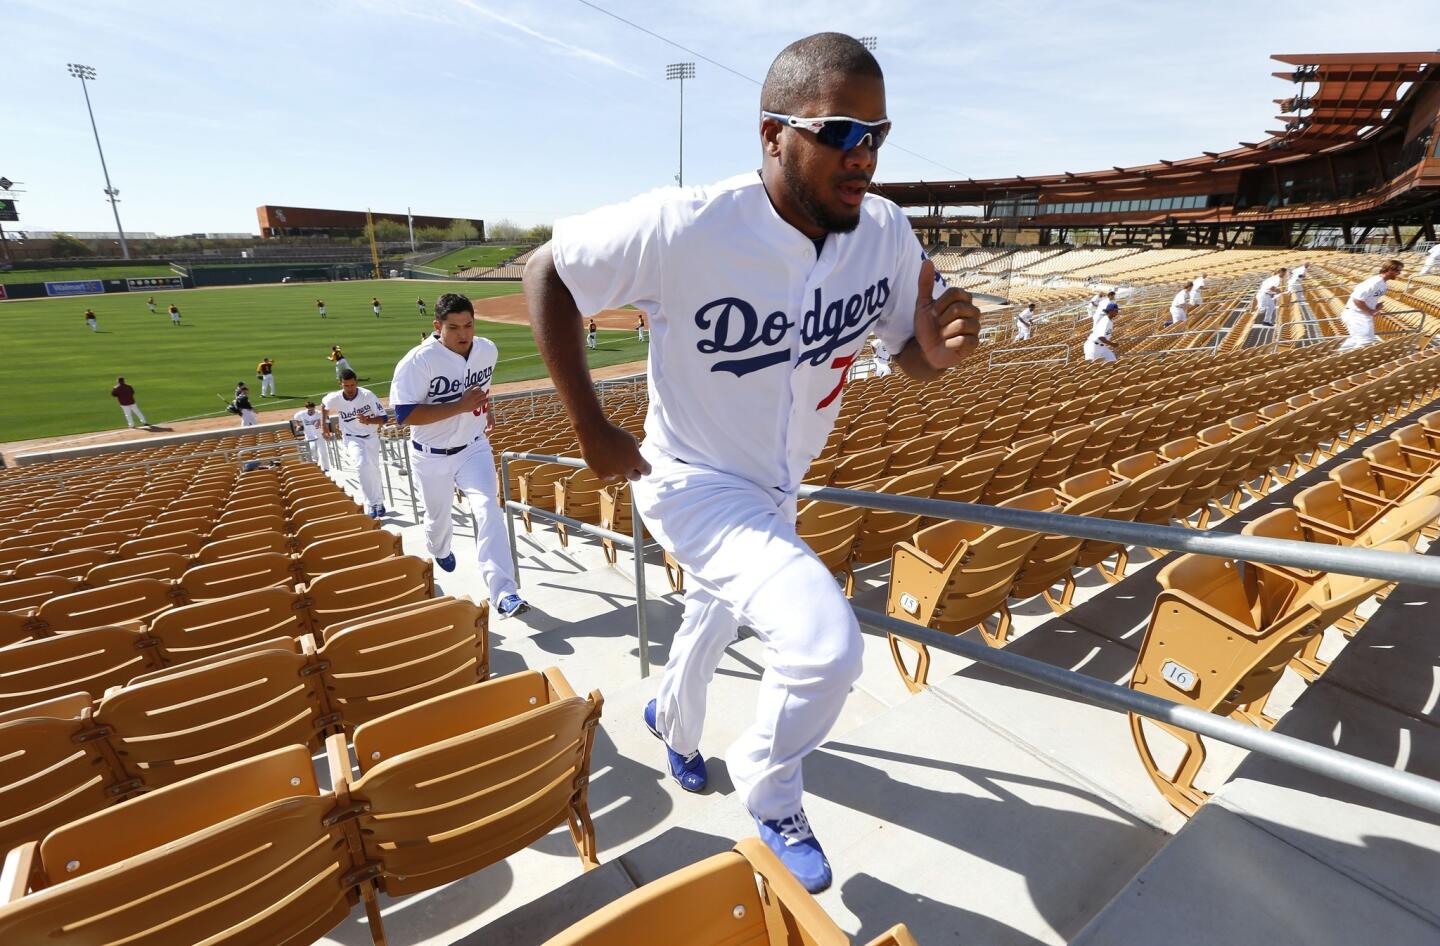 Pitcher Kenley Jansen leads a group running stairs at the Camelback Ranch ballpark and player development facility in Glendale, Ariz.